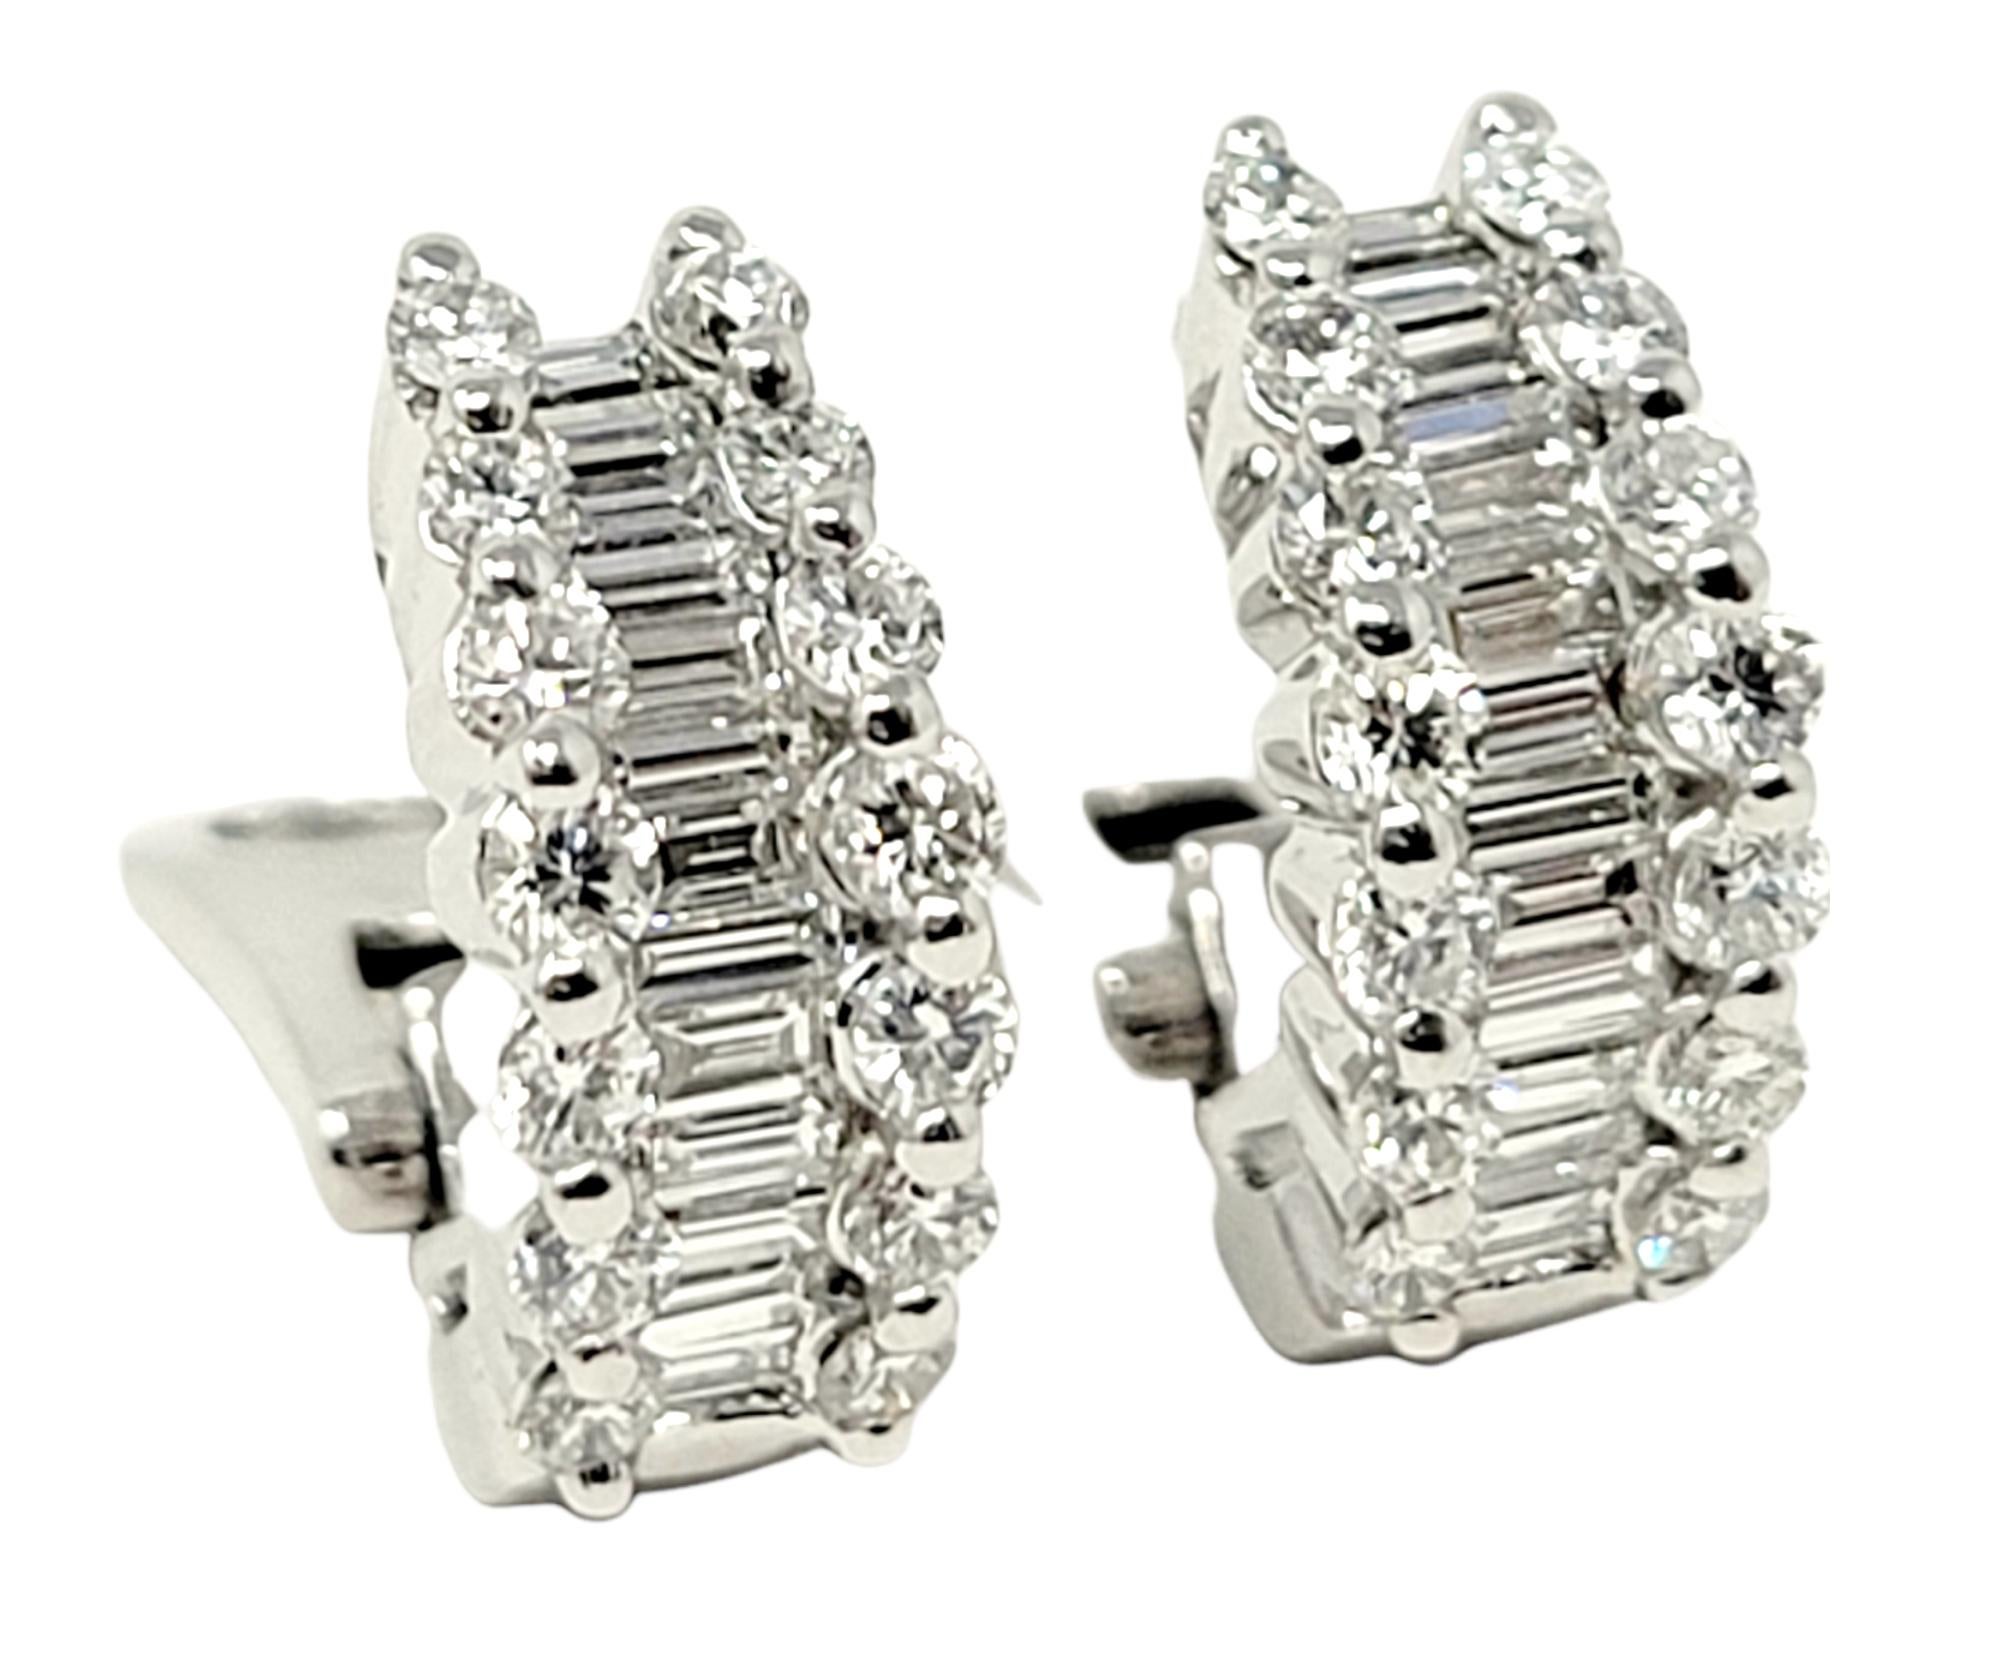 Simple yet stunning 14 karat gold and diamond huggie earrings are perfect for any occasion and bring a touch of elegance to any look. The curved shape gently hugs the ear for a contoured and secure fit, while the sparkling diamonds shimmer and shine